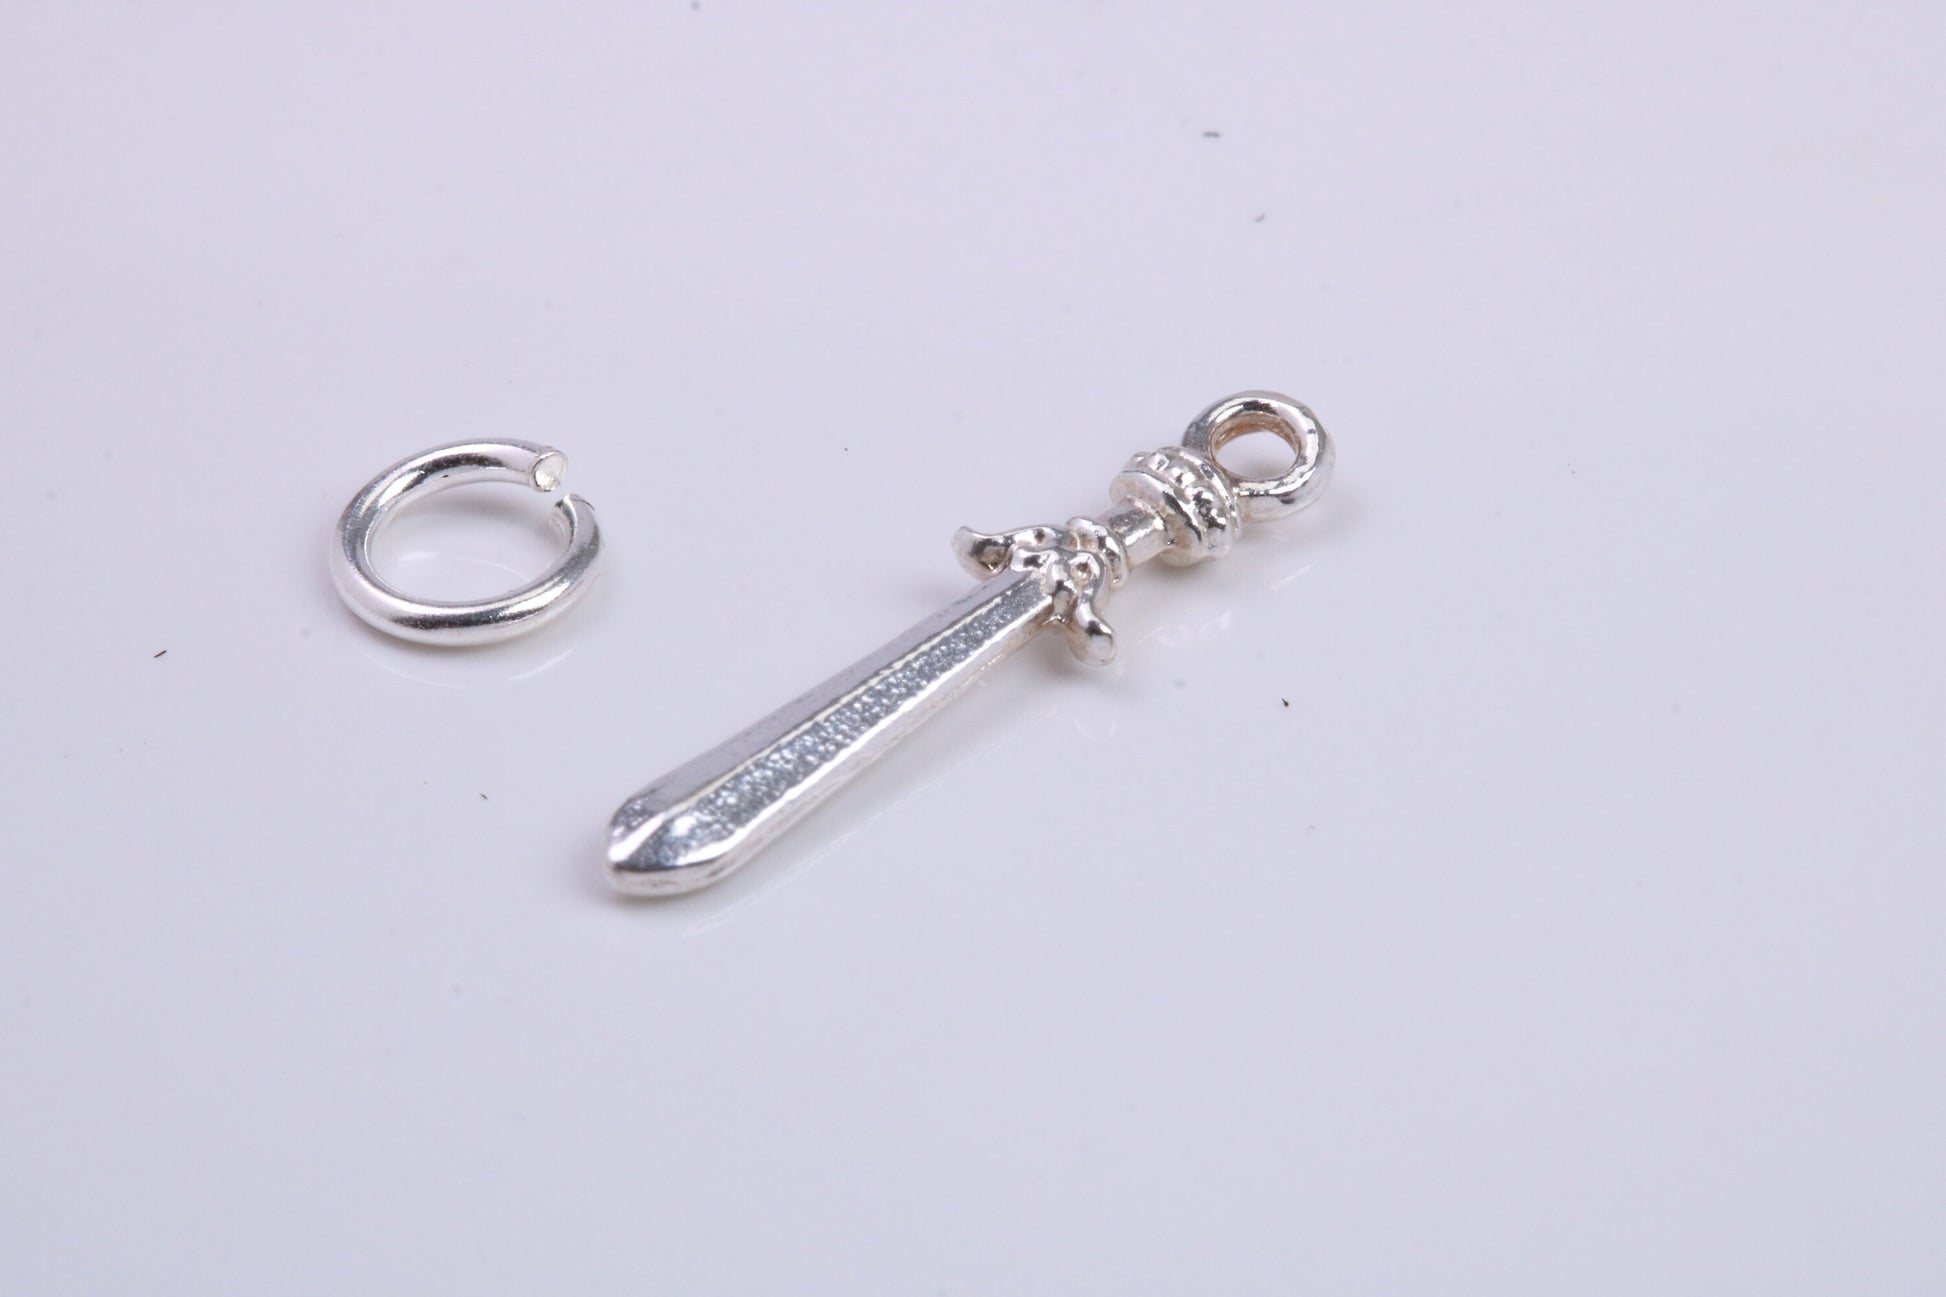 Sword Charm, Traditional Charm, Made from Solid 925 Grade Sterling Silver, Complete with Attachment Link